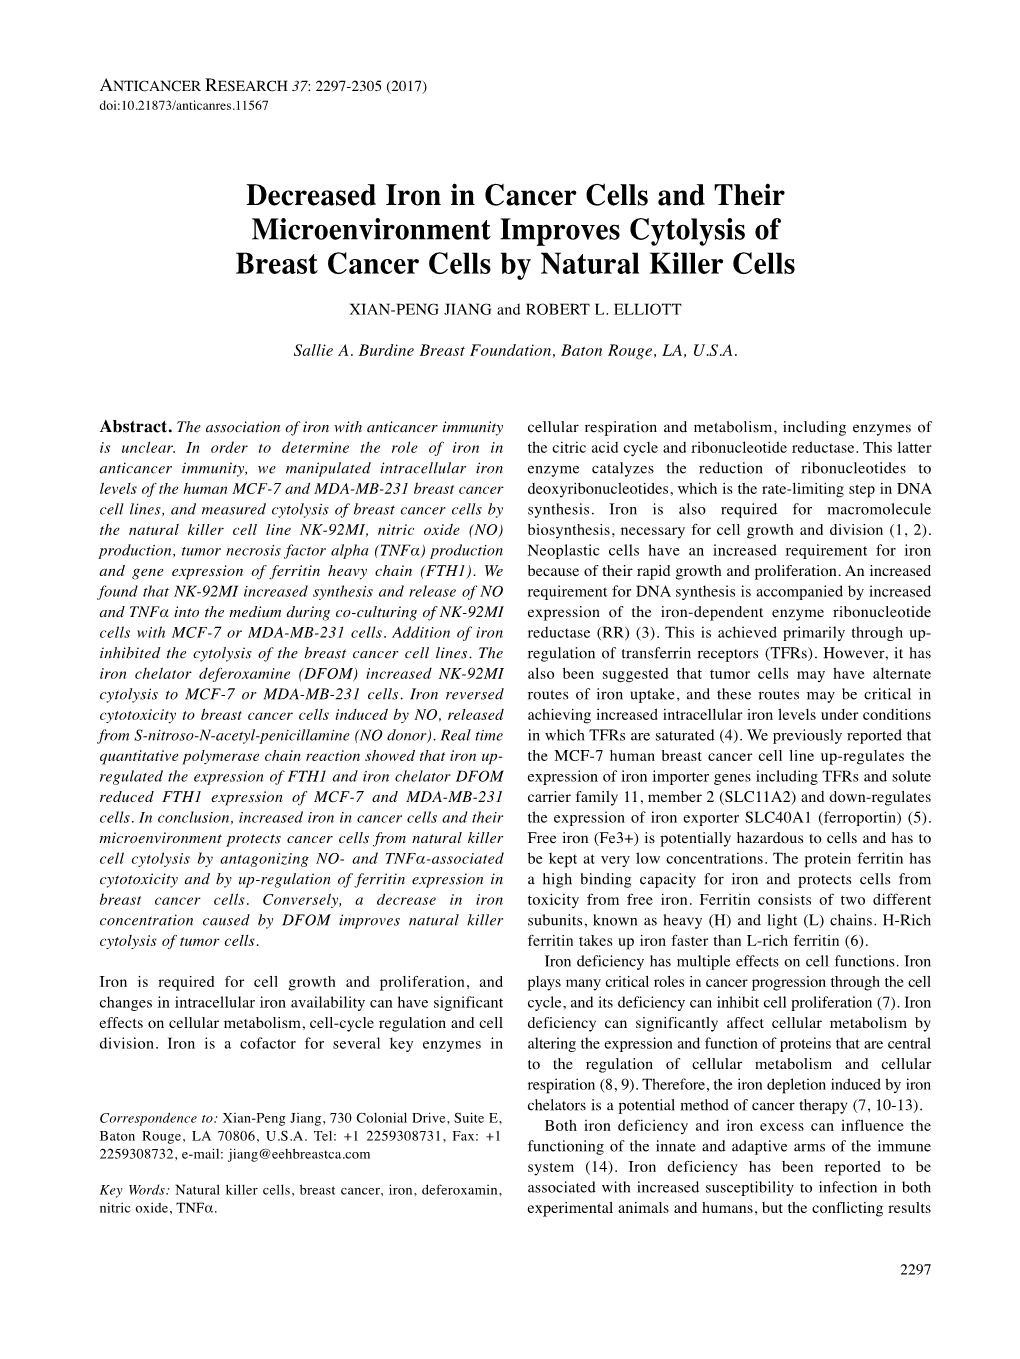 Decreased Iron in Cancer Cells and Their Microenvironment Improves Cytolysis of Breast Cancer Cells by Natural Killer Cells XIAN-PENG JIANG and ROBERT L